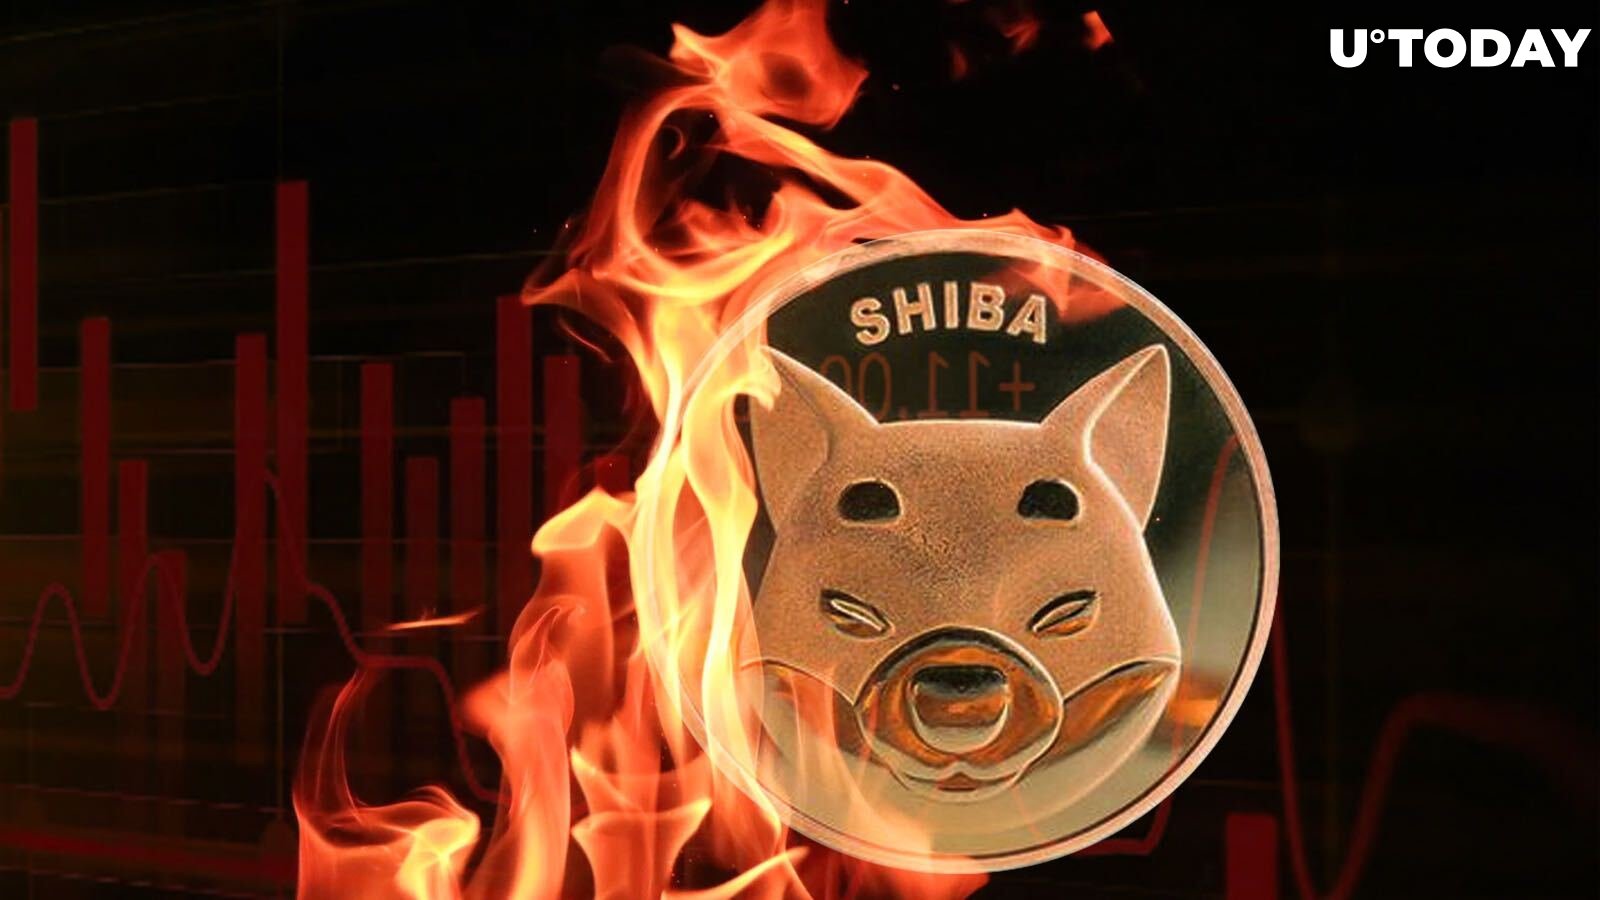 Shiba Inu Burning Amount Declines in September With 272 Million SHIB Burned Past Week